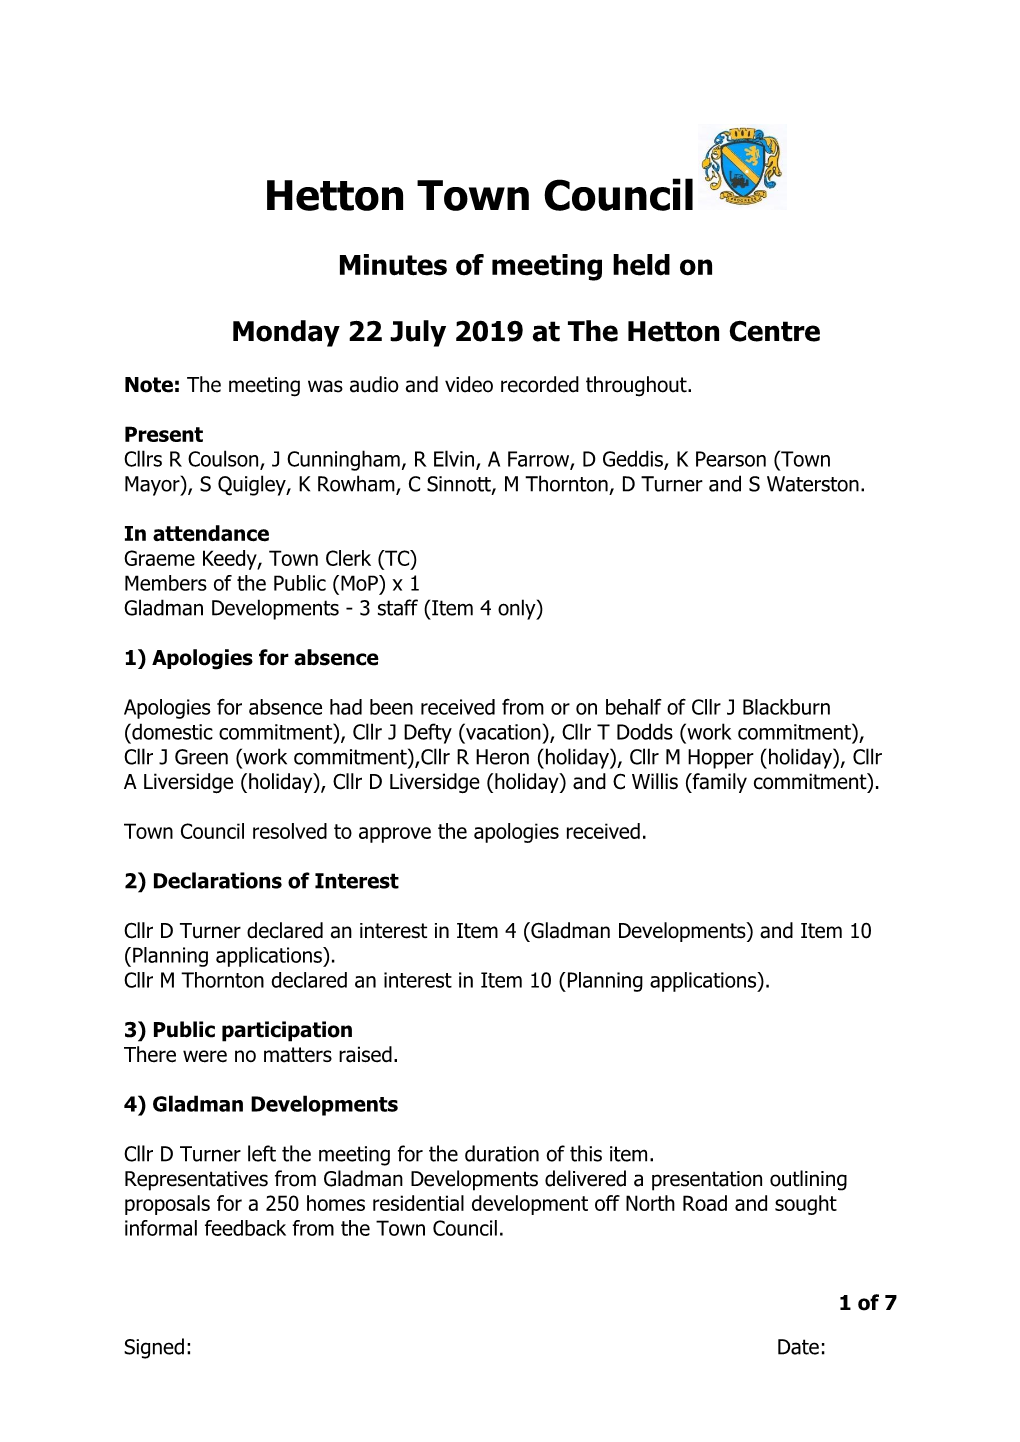 Minutes of HTC Meeting Held on Monday 22 July 2019